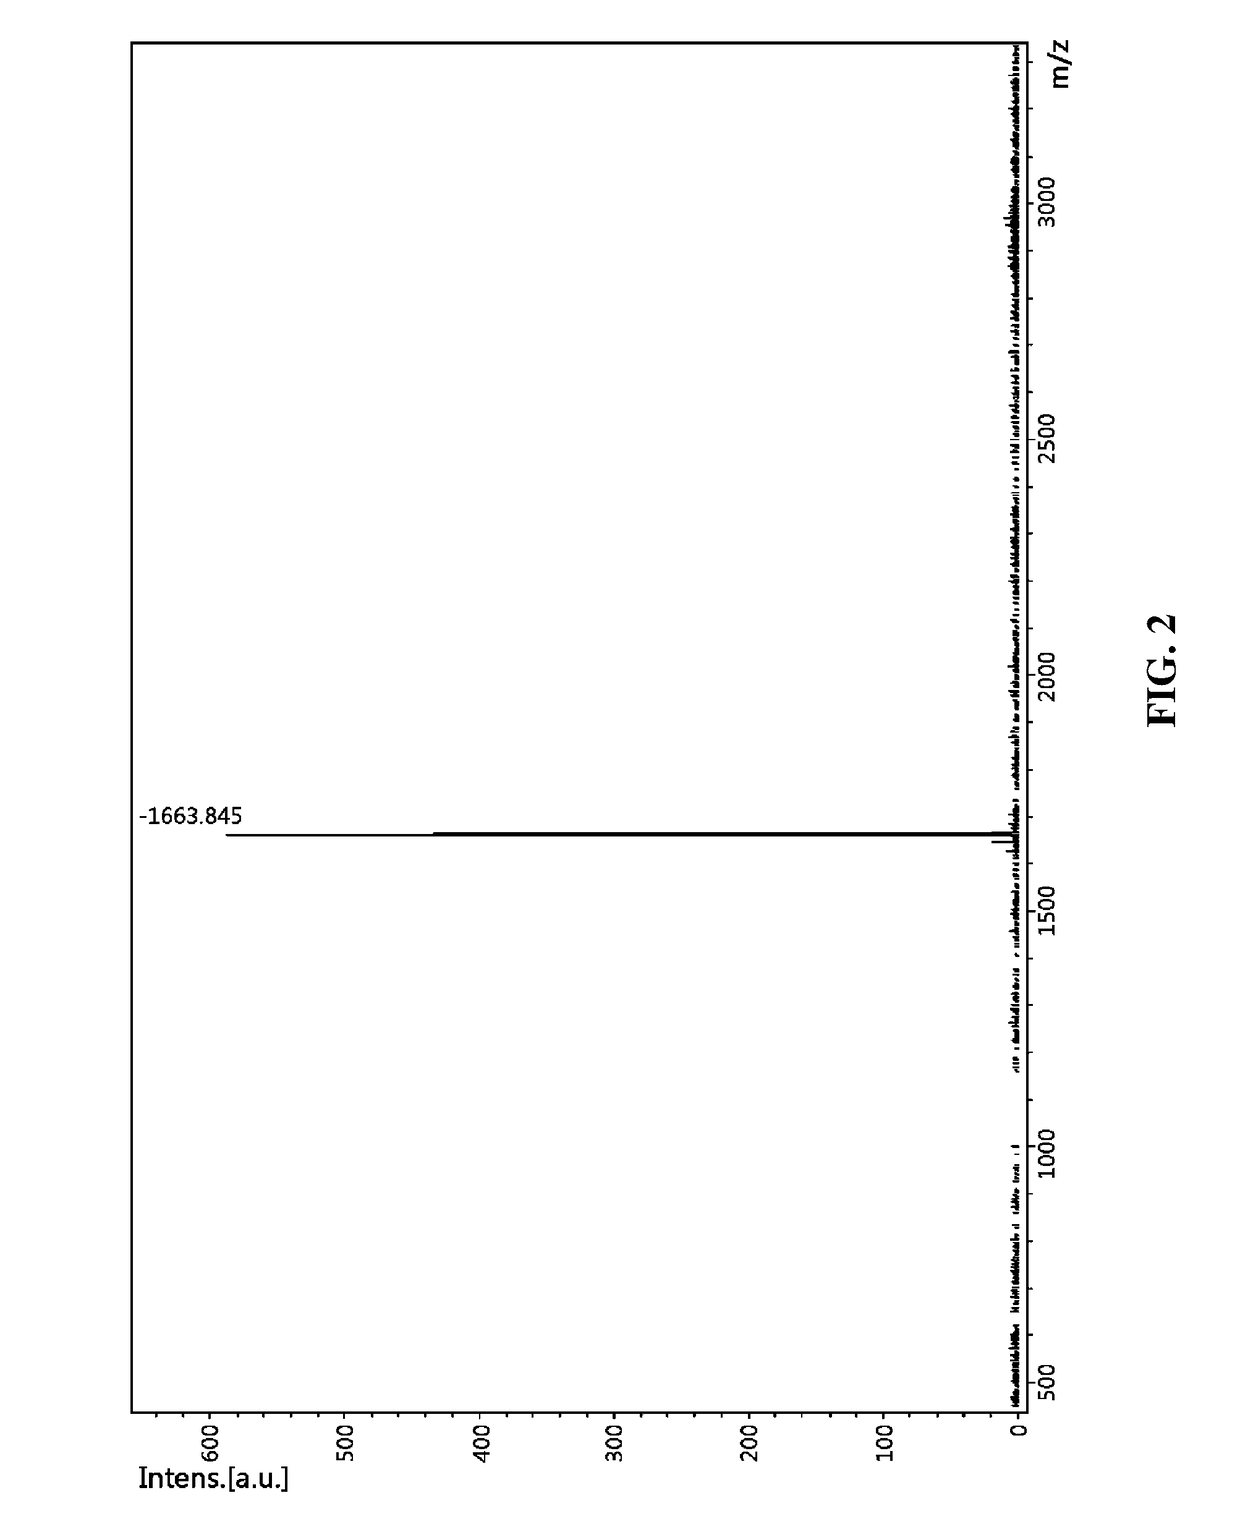 Composition, containing rgd motif-containing peptide or fragment thereof, for treating burns and glaucoma, alleviating skin wrinkles, and promoting hair growth